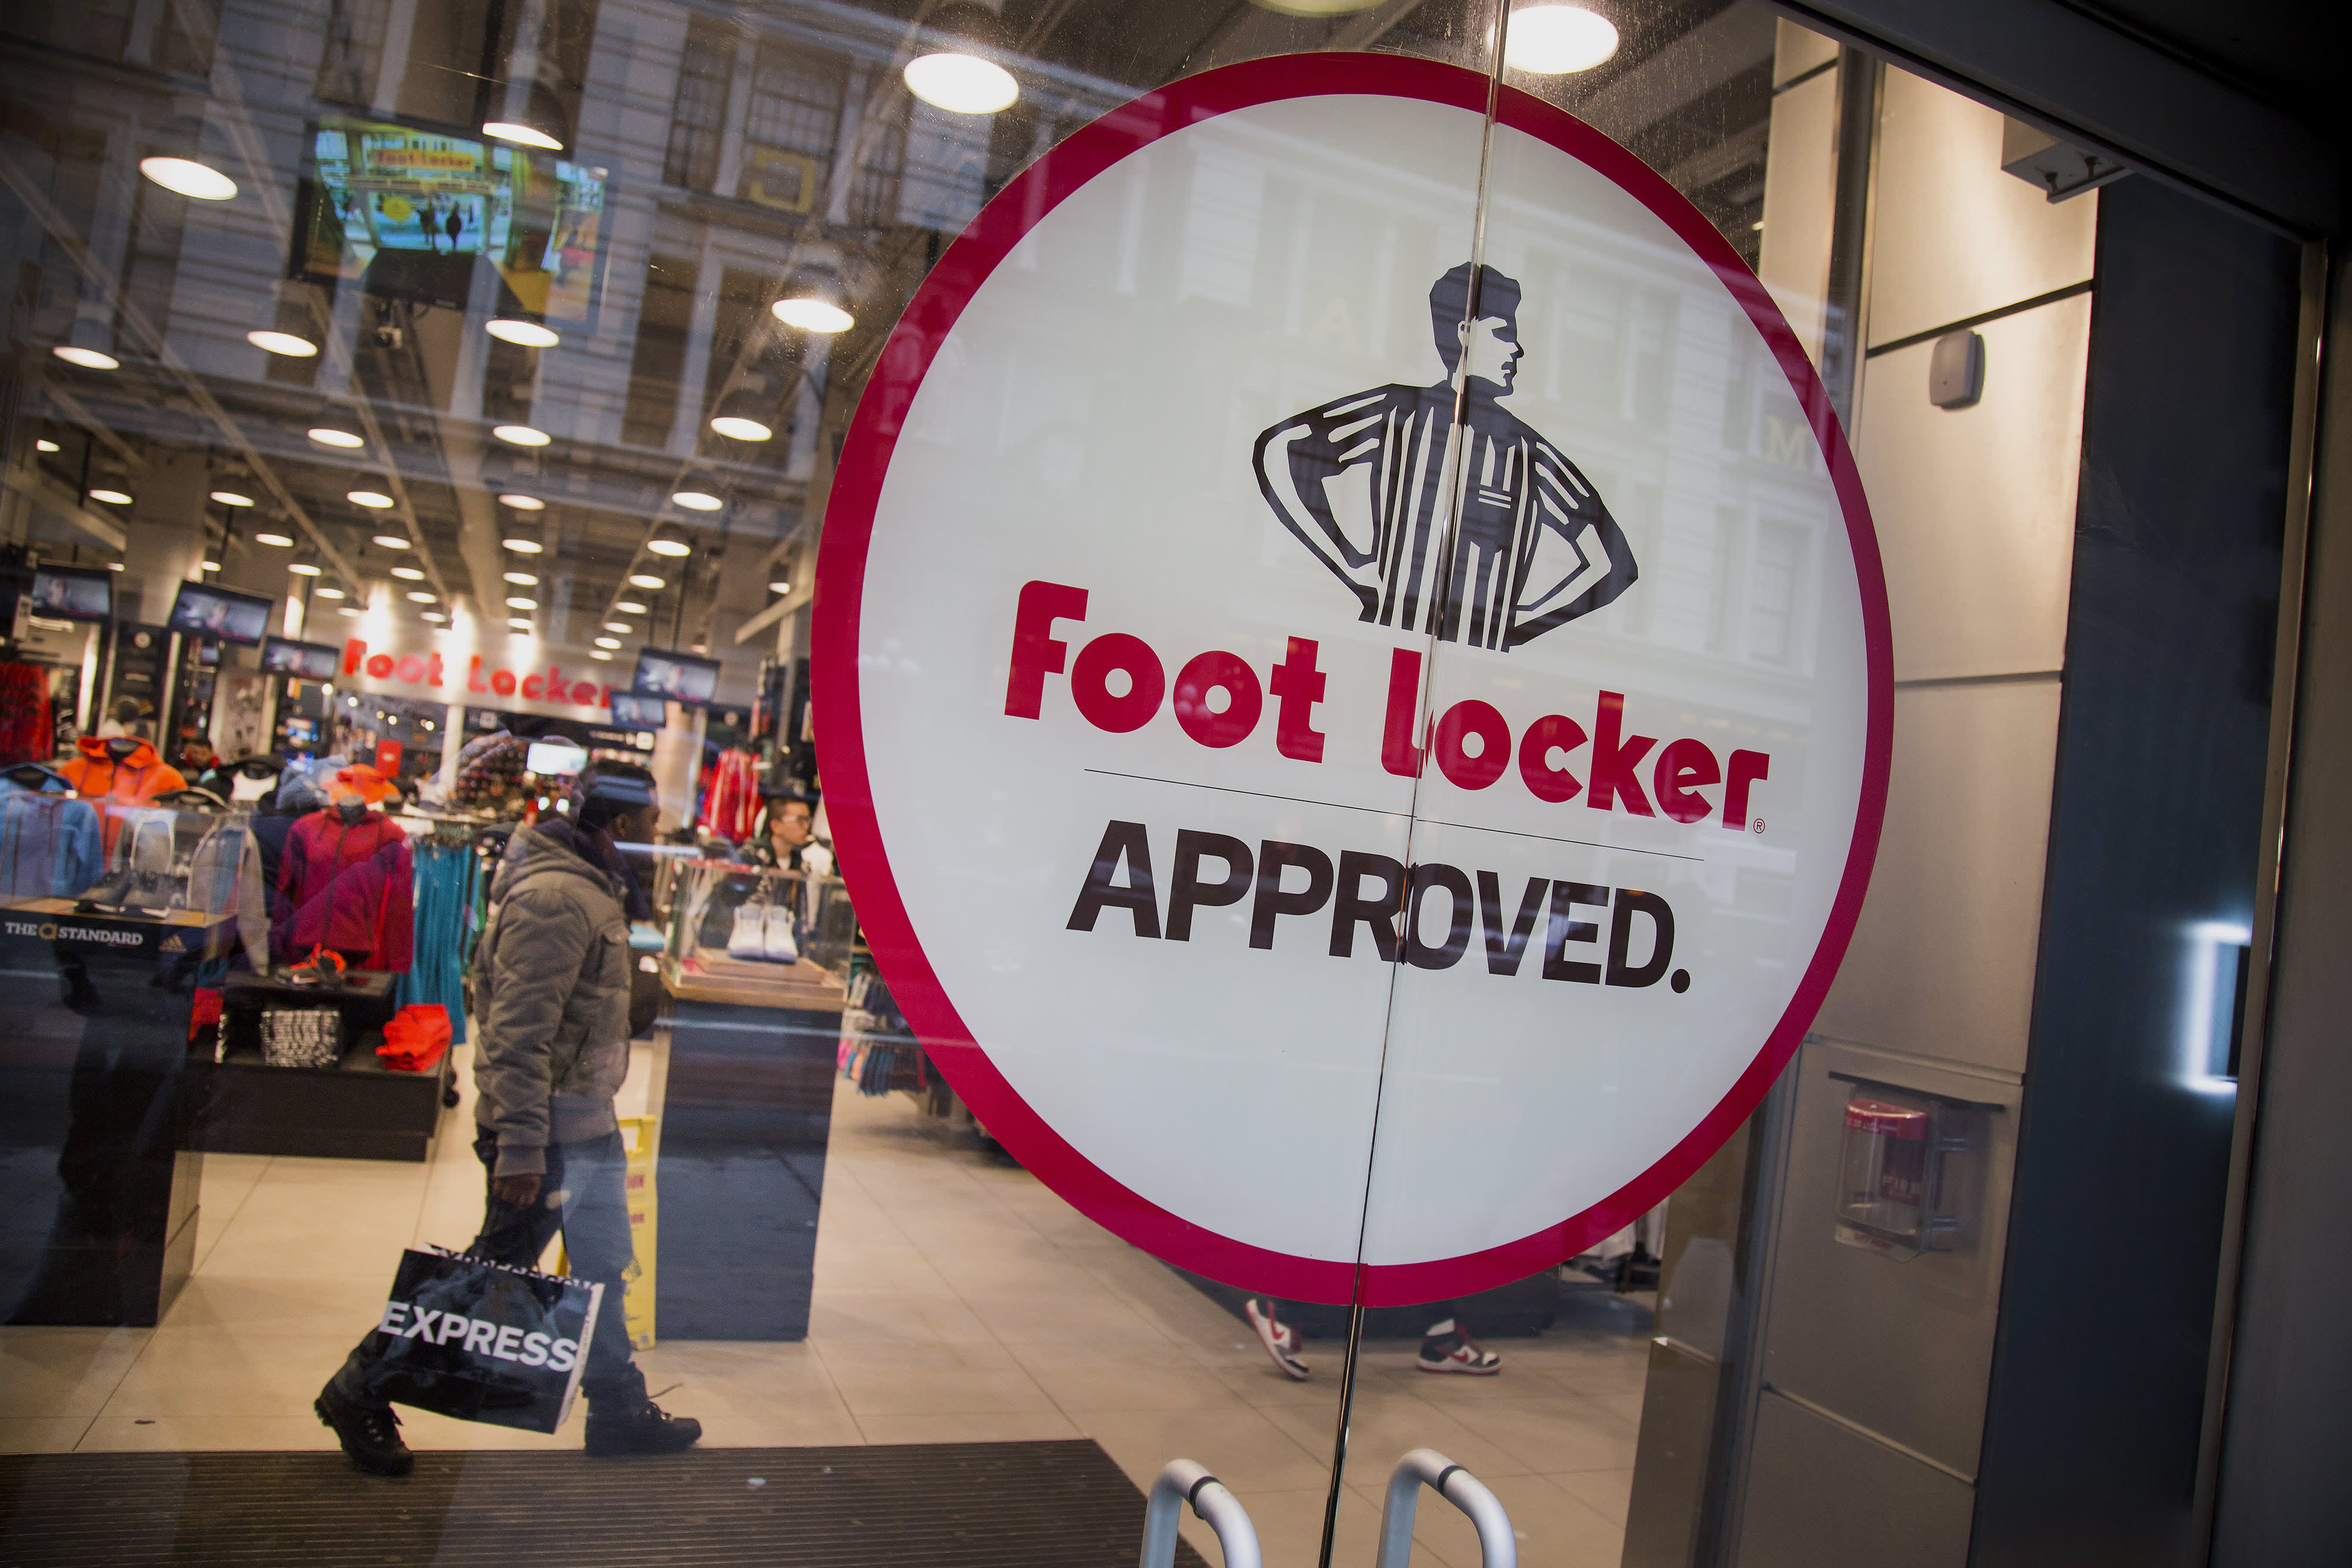 Here's what to expect when Club apparel retailers TJX and Foot Locker report this week